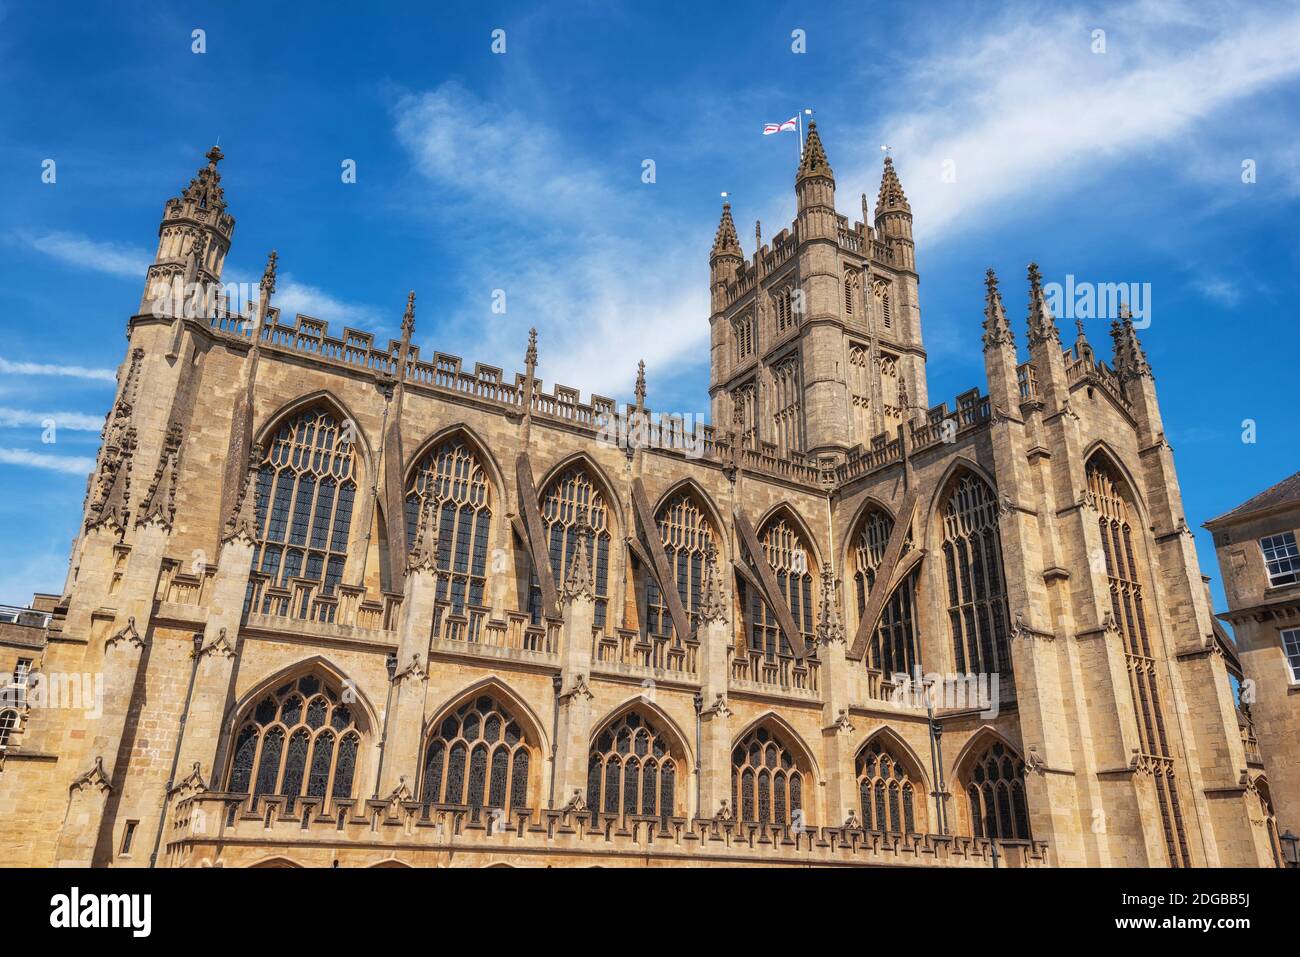 The Abbey Church of Saint Peter and Saint Paul, Bath, commonly known as Bath Abbey, Somerset England UK. Stock Photo